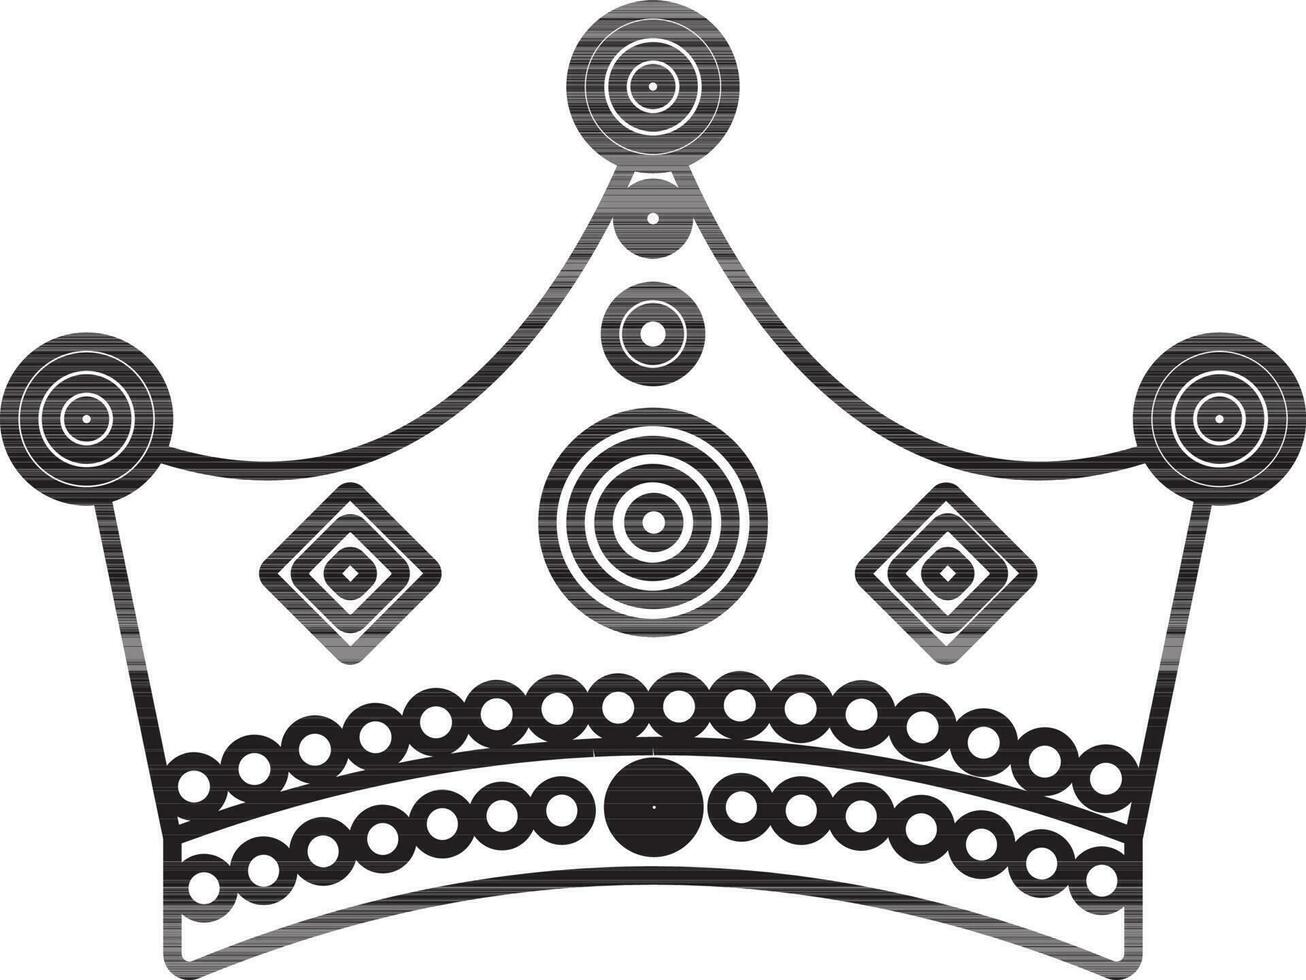 Flat style crown of king. vector